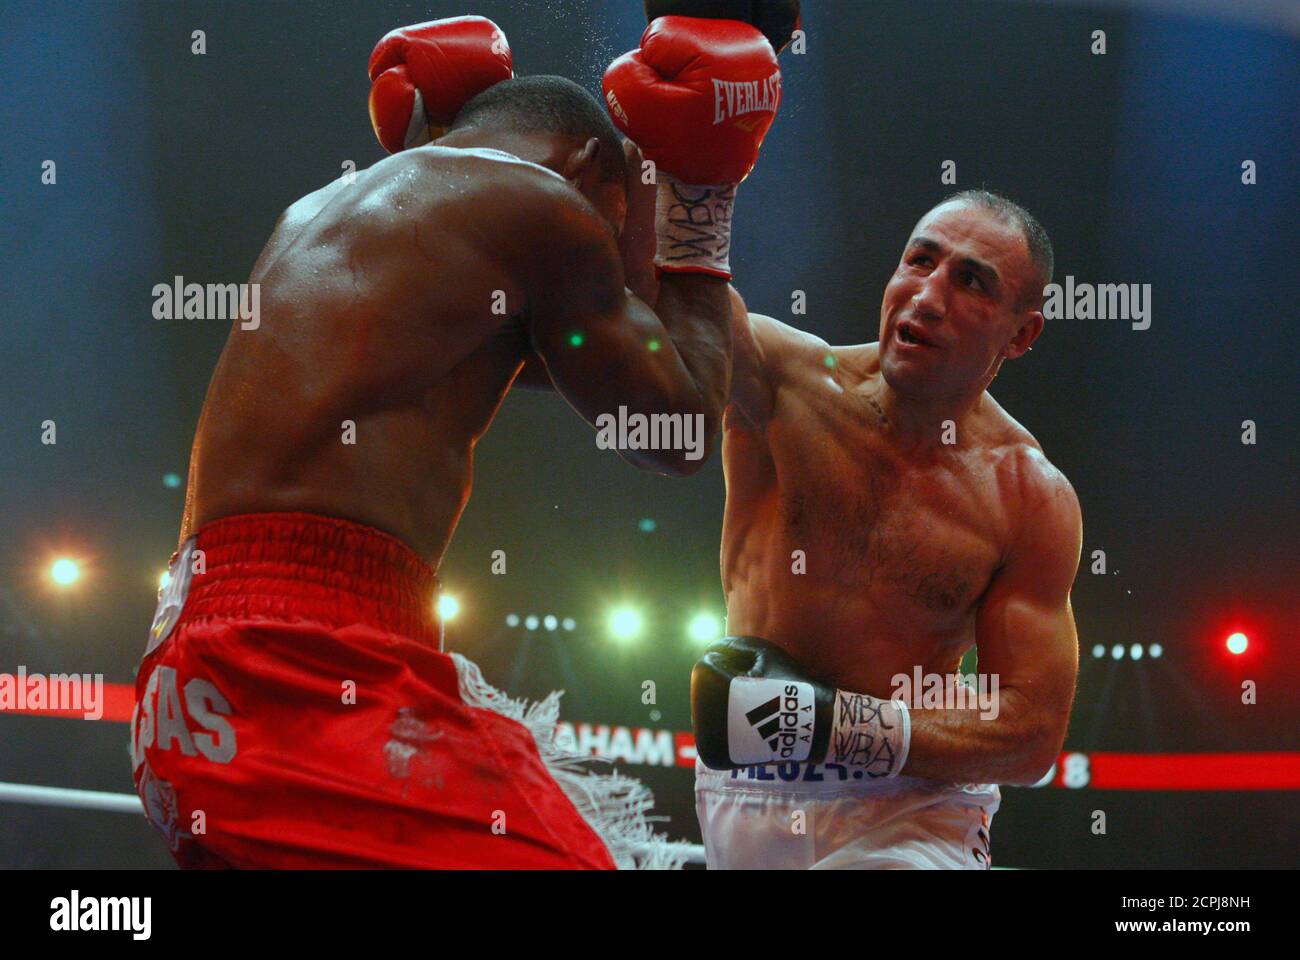 Arthur Abraham High Resolution Stock Photography and Images - Alamy